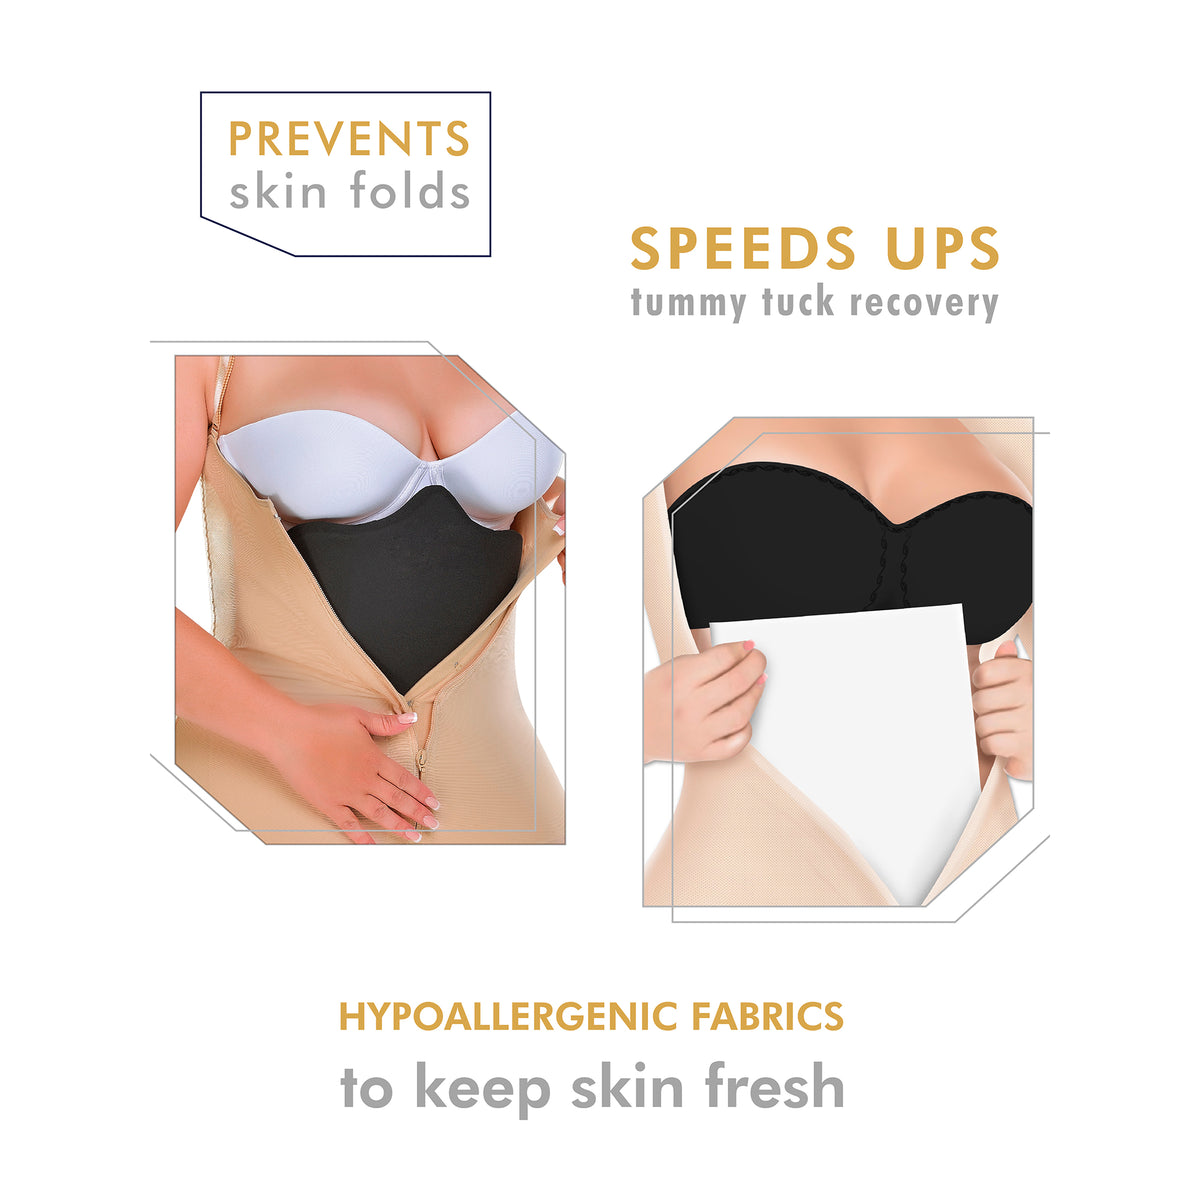 Lipo Foam SHEETS FOR POST SURGICAL USE WITH COMPRESSION GARMENT AFTER  LIPOSUCTION TUMMY TUCK AB FLATTENING 8 X 11 5 PACK NEW MILLENNIUM PROD 